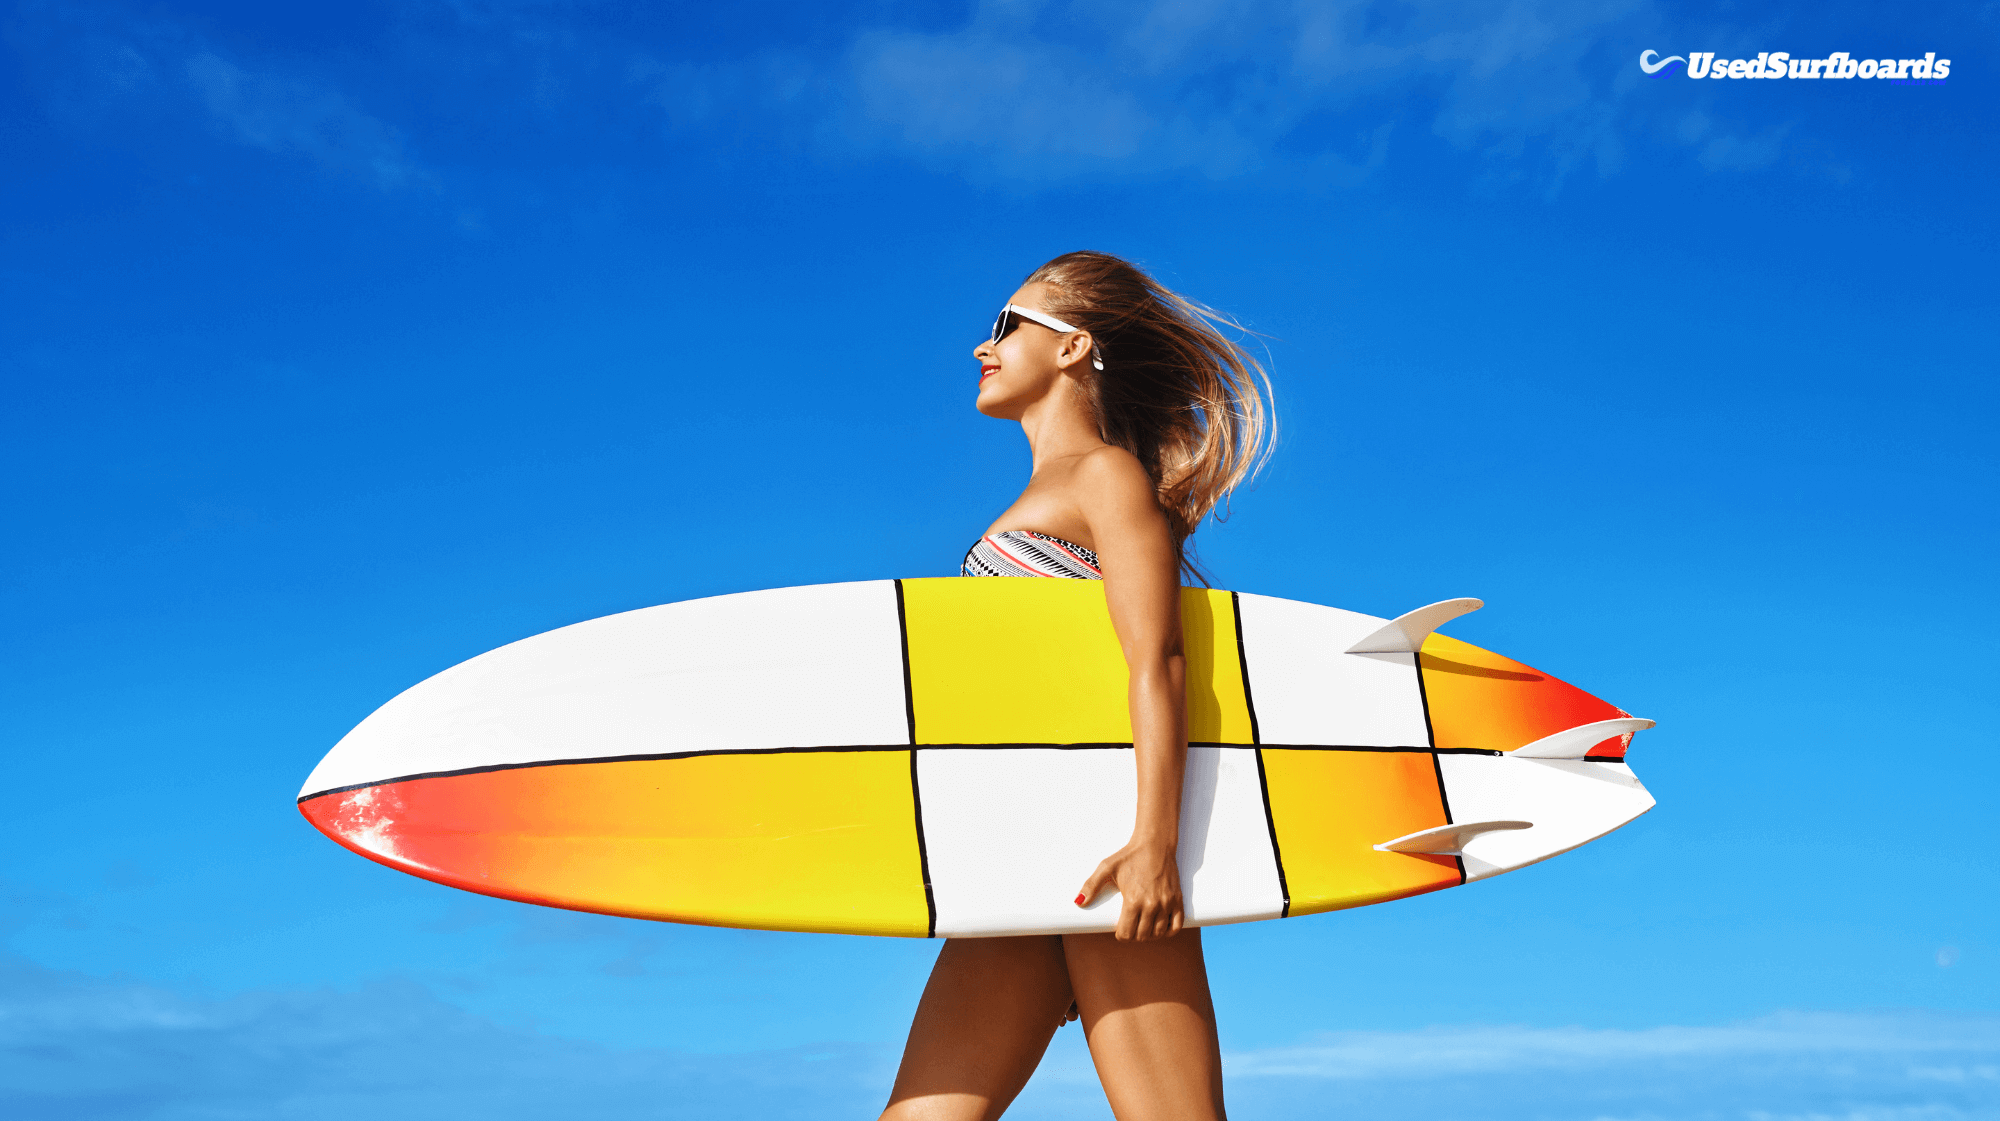 Surfboard Art: Add a Touch of Creativity to Your Gear